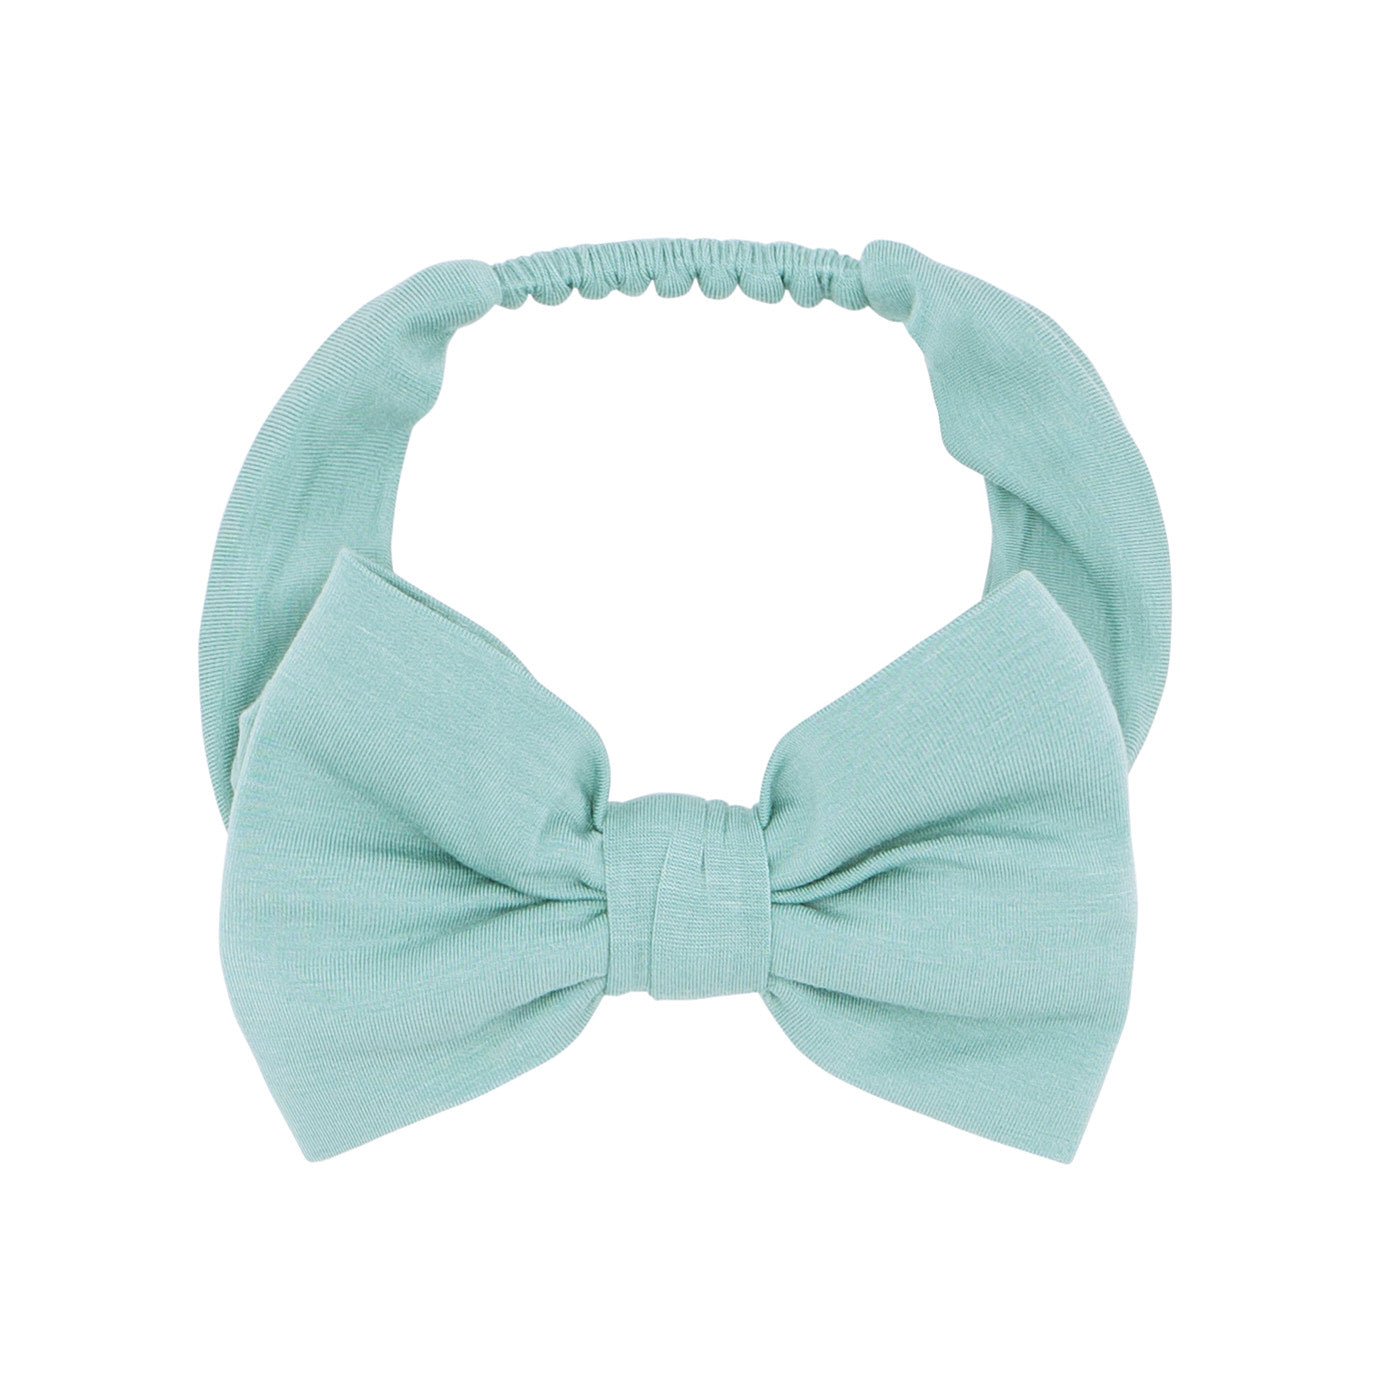 Flat lay image of an Aqua Mist luxe bow headband in size age 3 to age 8